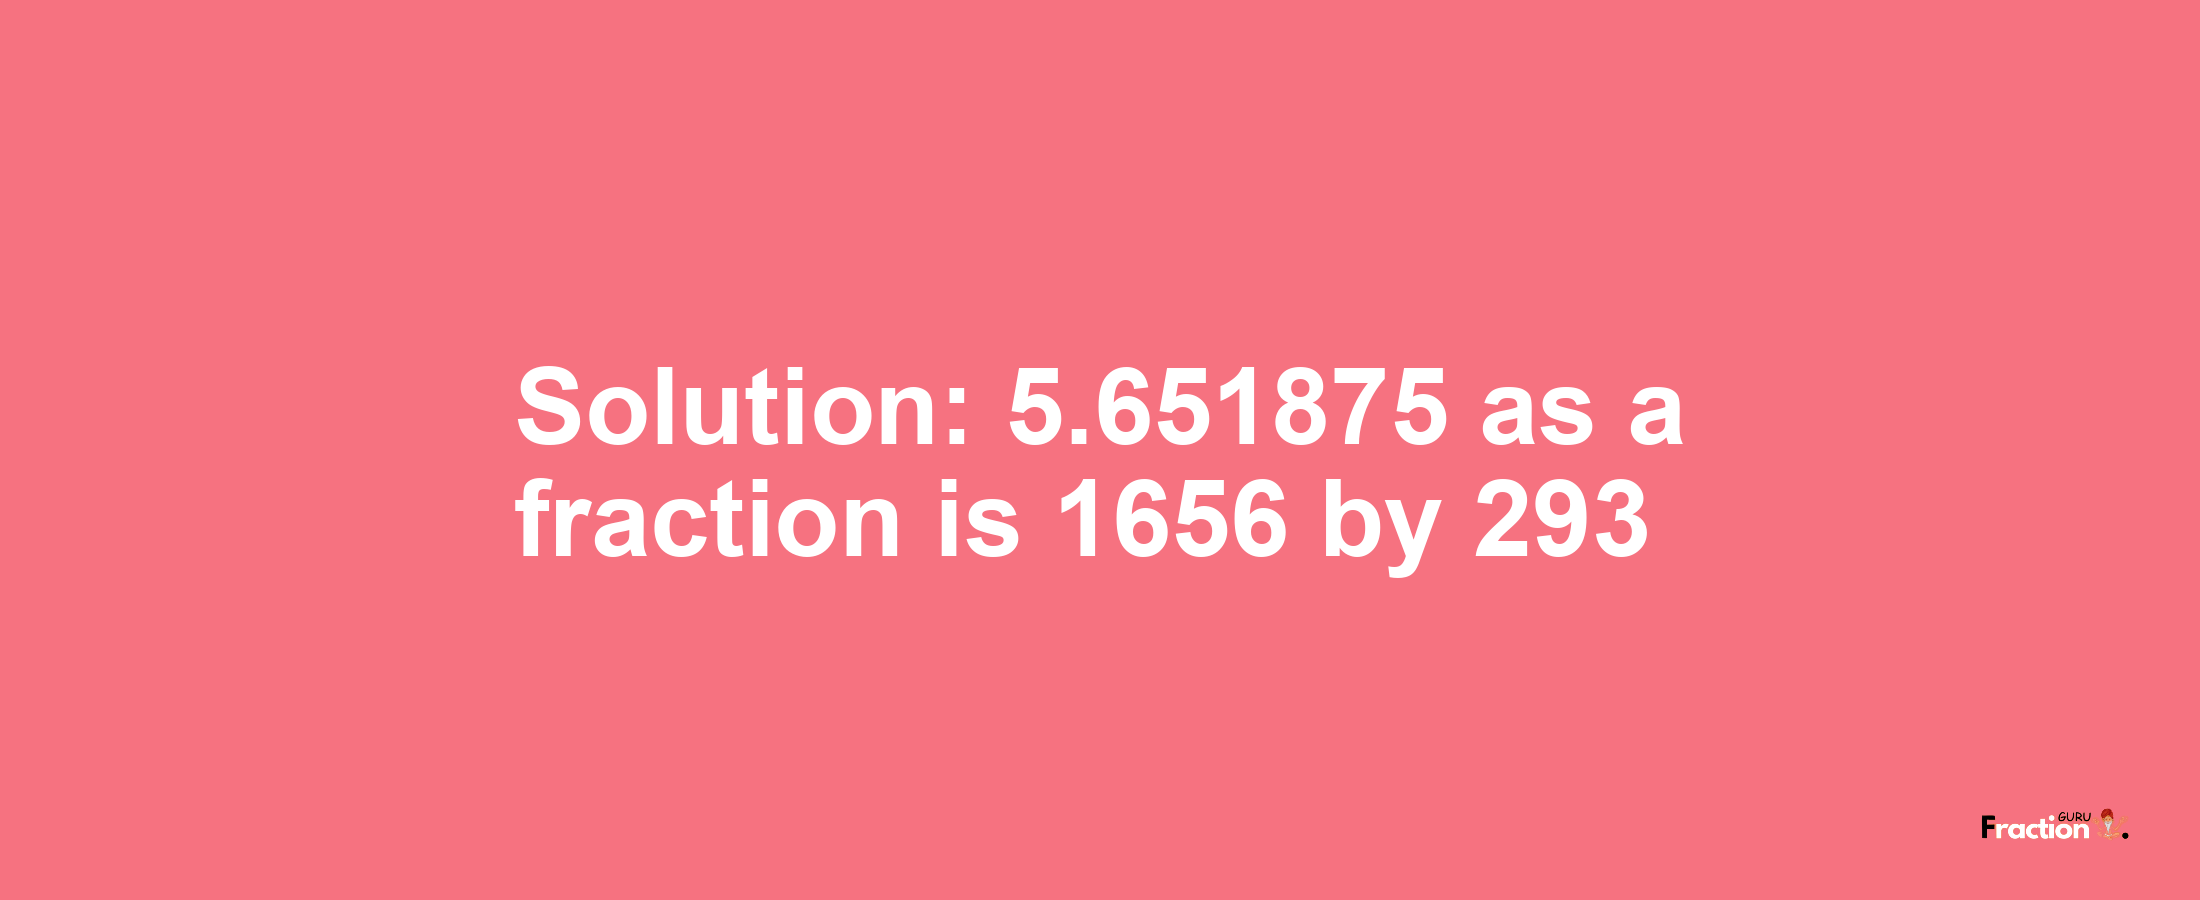 Solution:5.651875 as a fraction is 1656/293